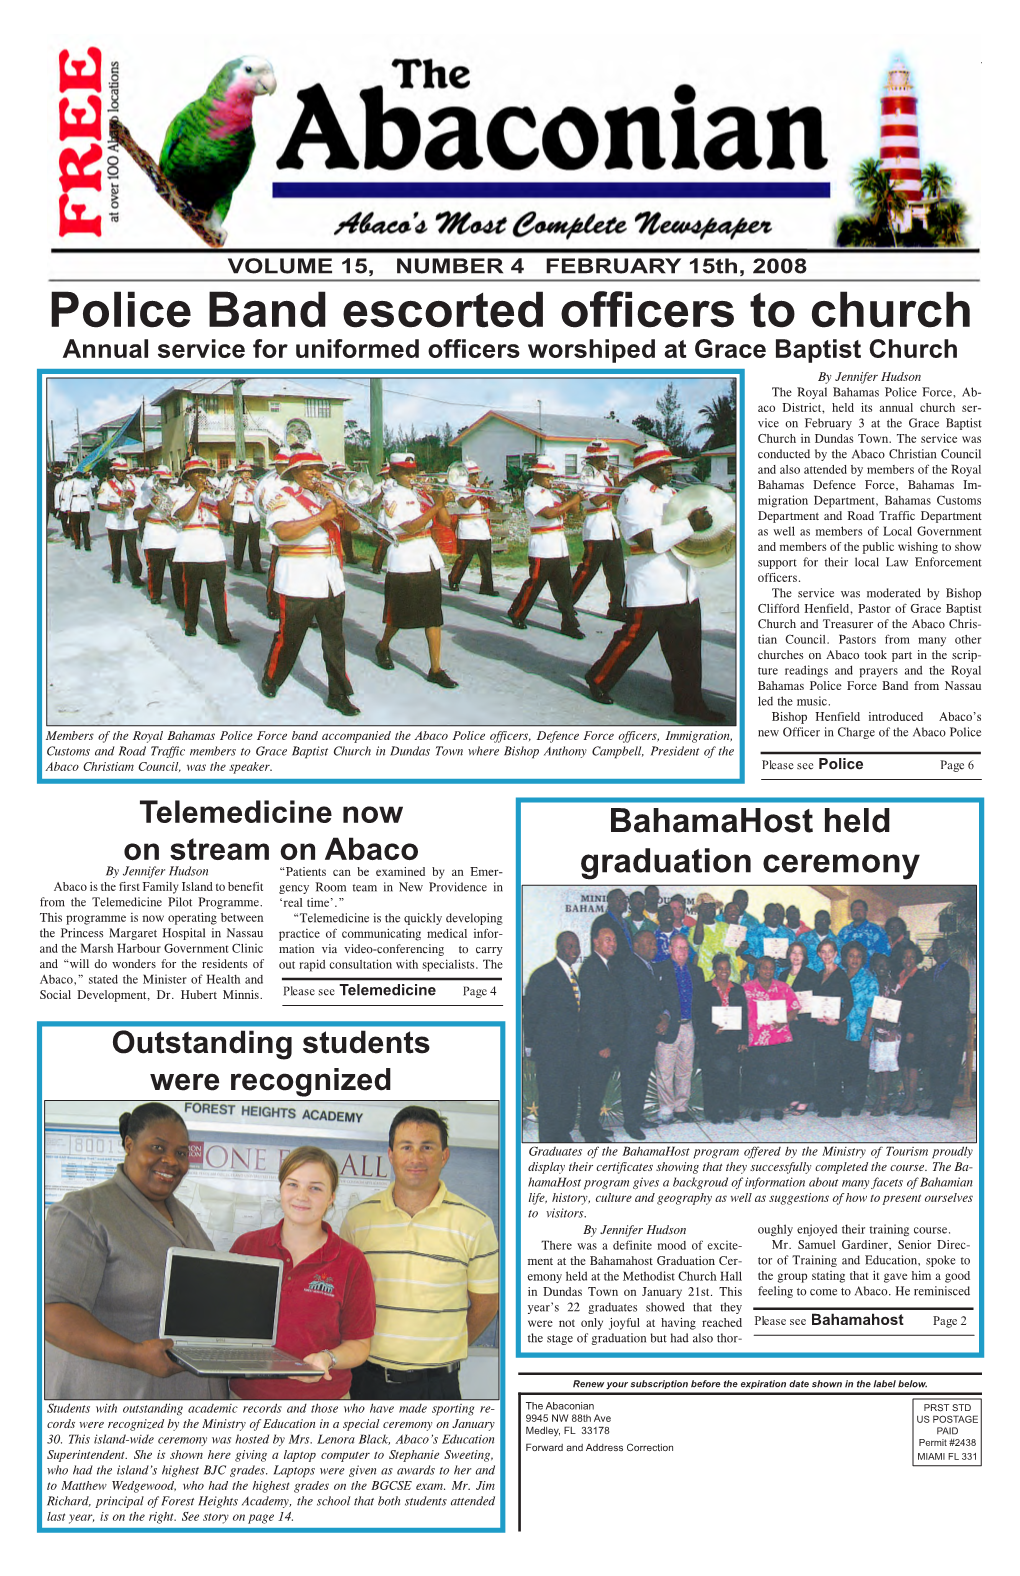 Police Band Escorted Officers to Church